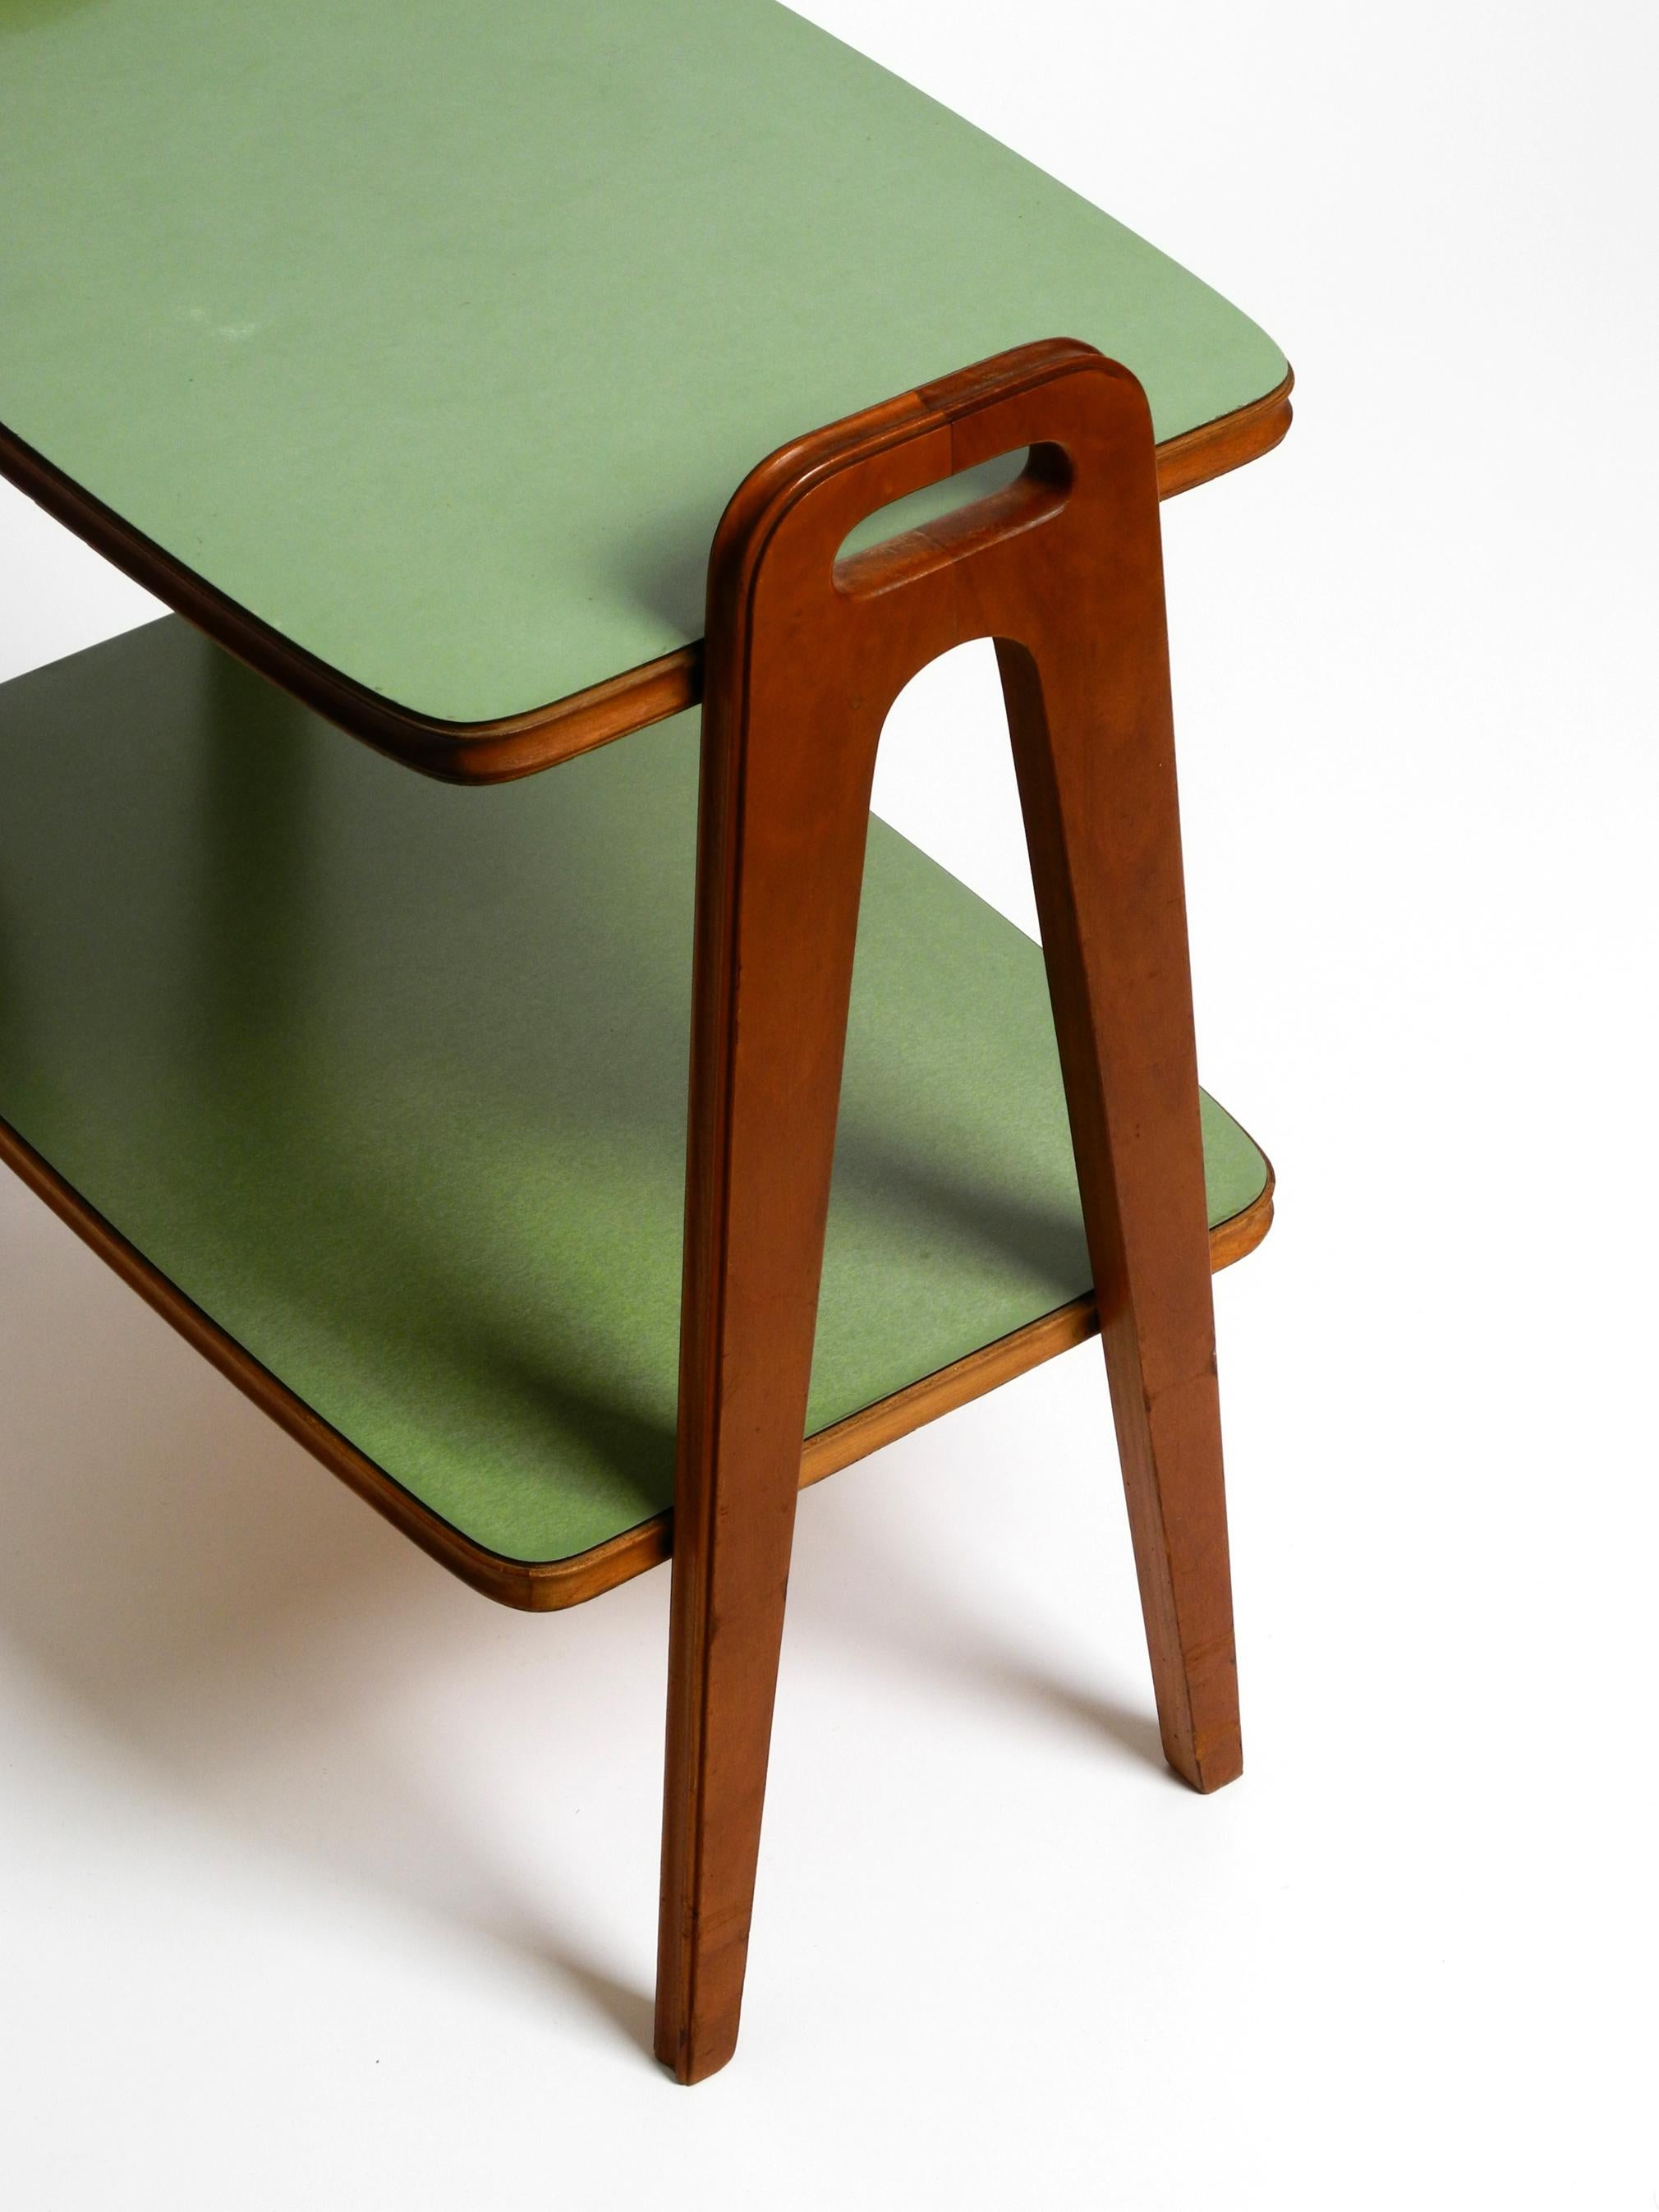 Mid-20th Century Small Mid Century Modern side table made of walnut with green Formica surfaces